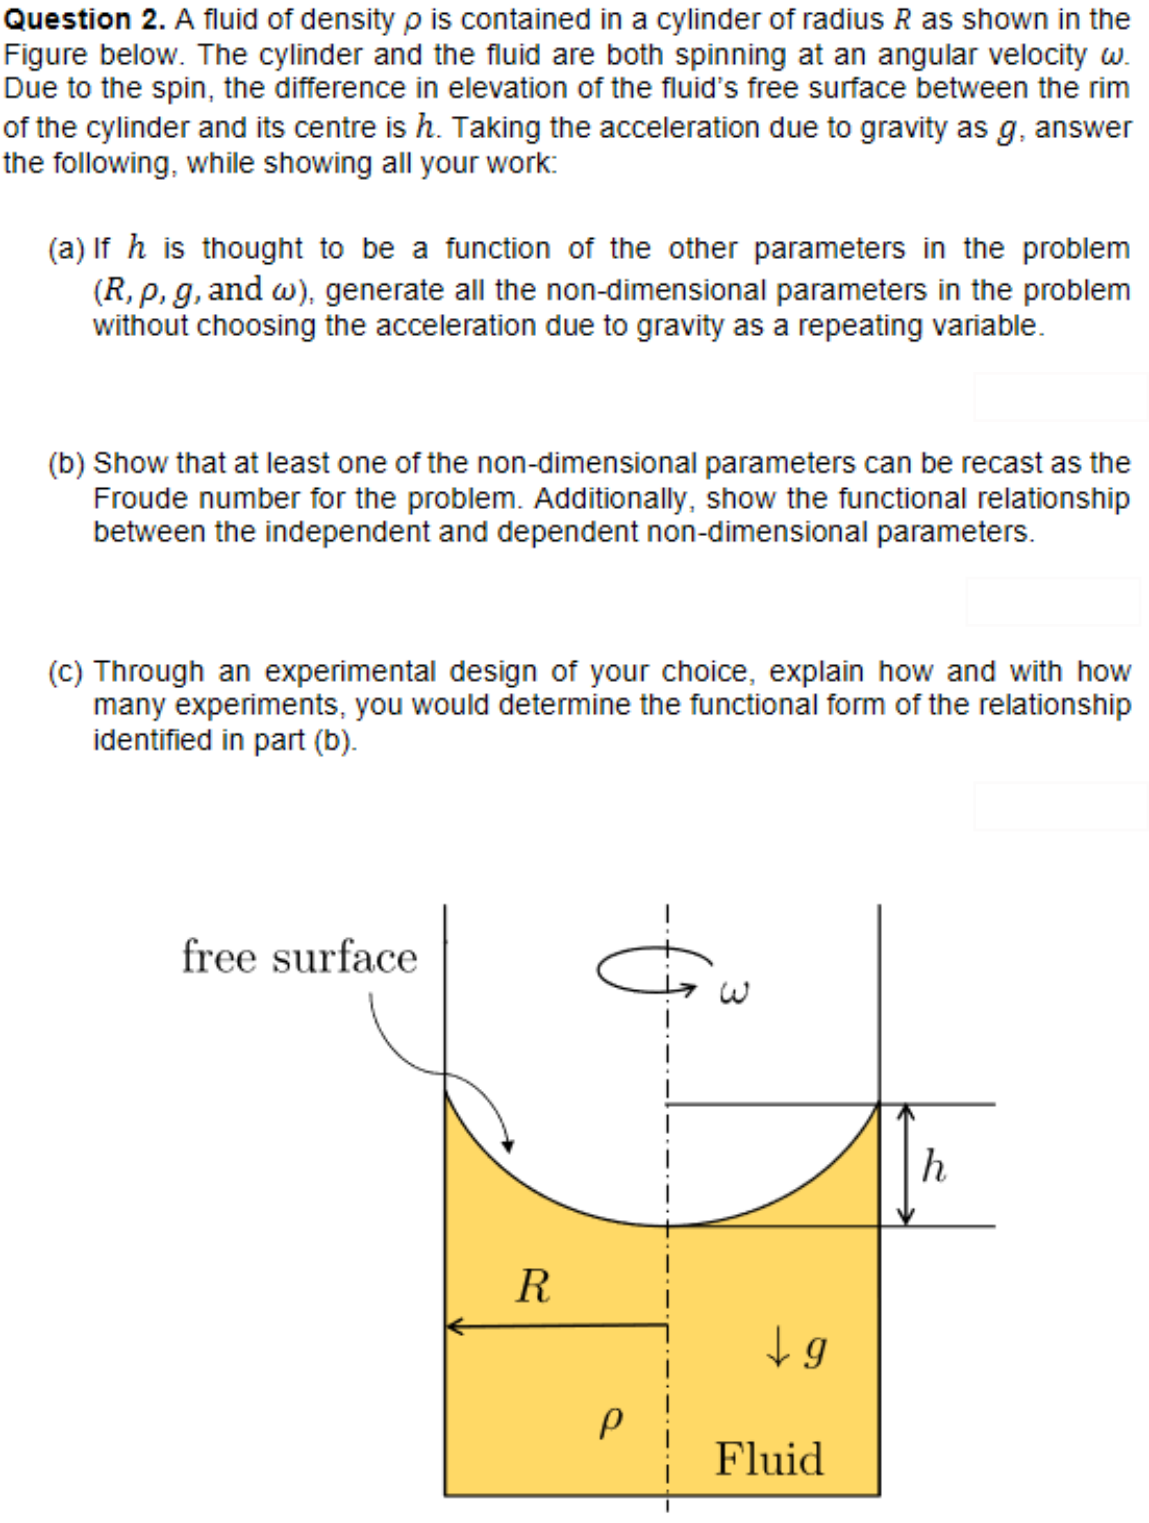 Question 2. A fluid of density p is contained in a cylinder of radius R as shown in the
Figure below. The cylinder and the fluid are both spinning at an angular velocity w.
Due to the spin, the difference in elevation of the fluid's free surface between the rim
of the cylinder and its centre is h. Taking the acceleration due to gravity as g, answer
the following, while showing all your work:
(a) If h is thought to be a function of the other parameters in the problem
(R, p, g, and w), generate all the non-dimensional parameters in the problem
without choosing the acceleration due to gravity as a repeating variable.
(b) Show that at least one of the non-dimensional parameters can be recast as the
Froude number for the problem. Additionally, show the functional relationship
between the independent and dependent non-dimensional parameters.
(c) Through an experimental design of your choice, explain how and with how
many experiments, you would determine the functional form of the relationship
identified in part (b).
free surface
h
R
P
↓g
Fluid